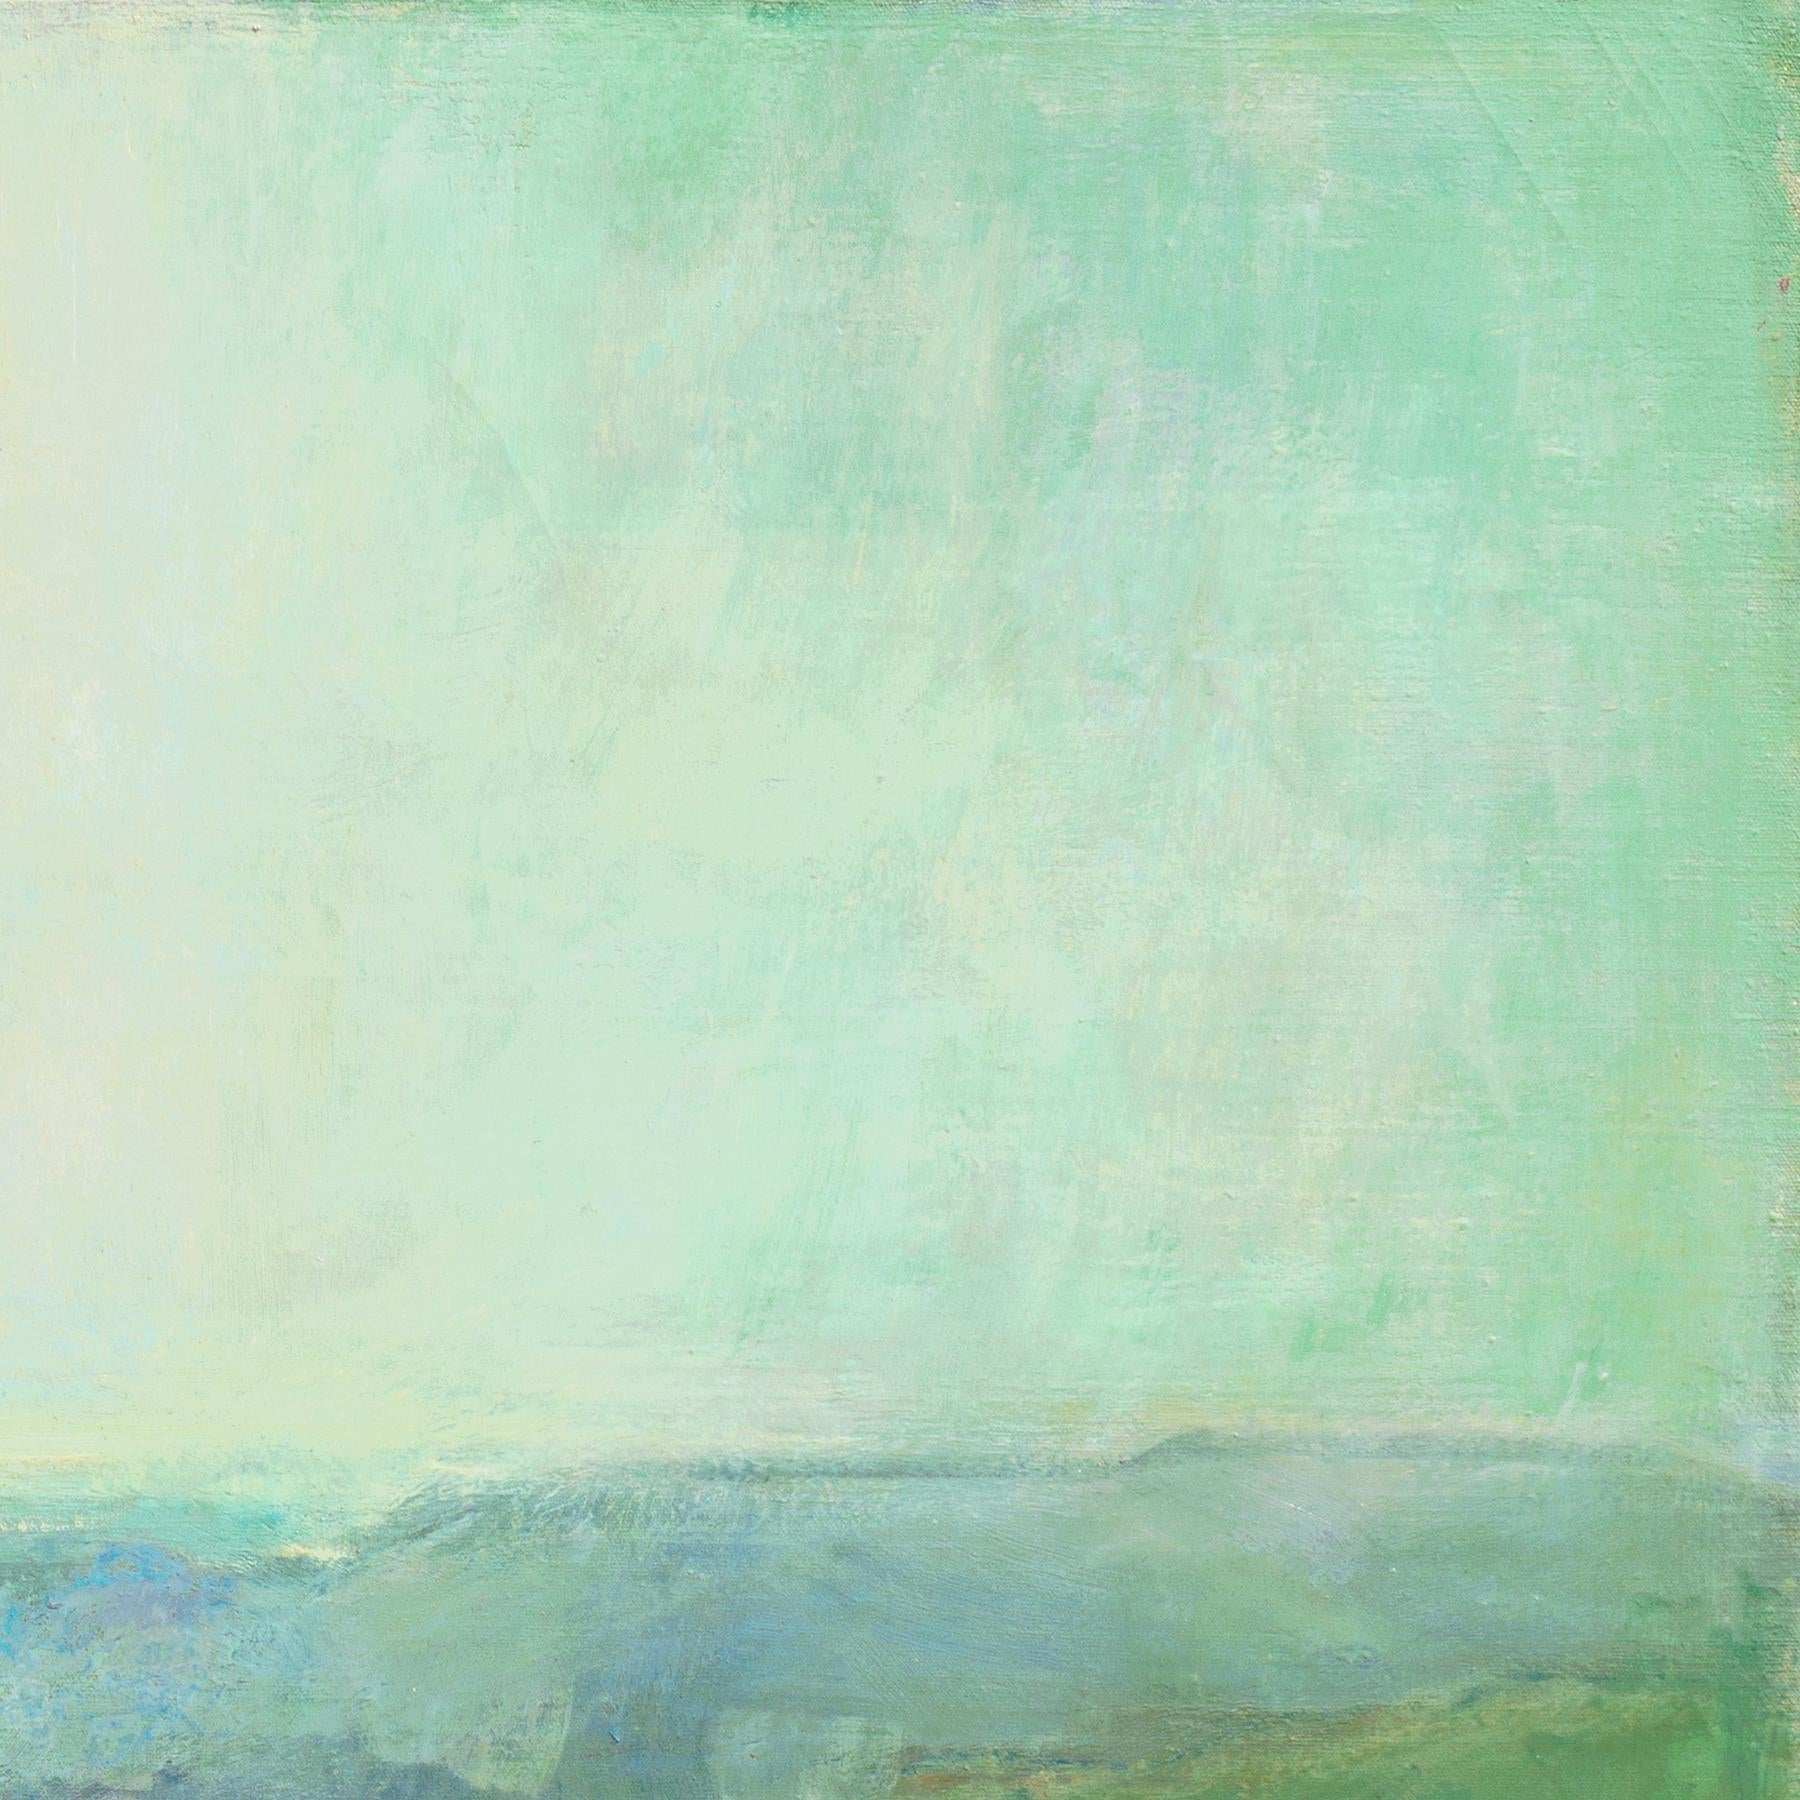 California Coastal Landscape (Abstraction, Mid-Century, Modernism, Green, Blue - Post-Impressionist Painting by Anton Dahl